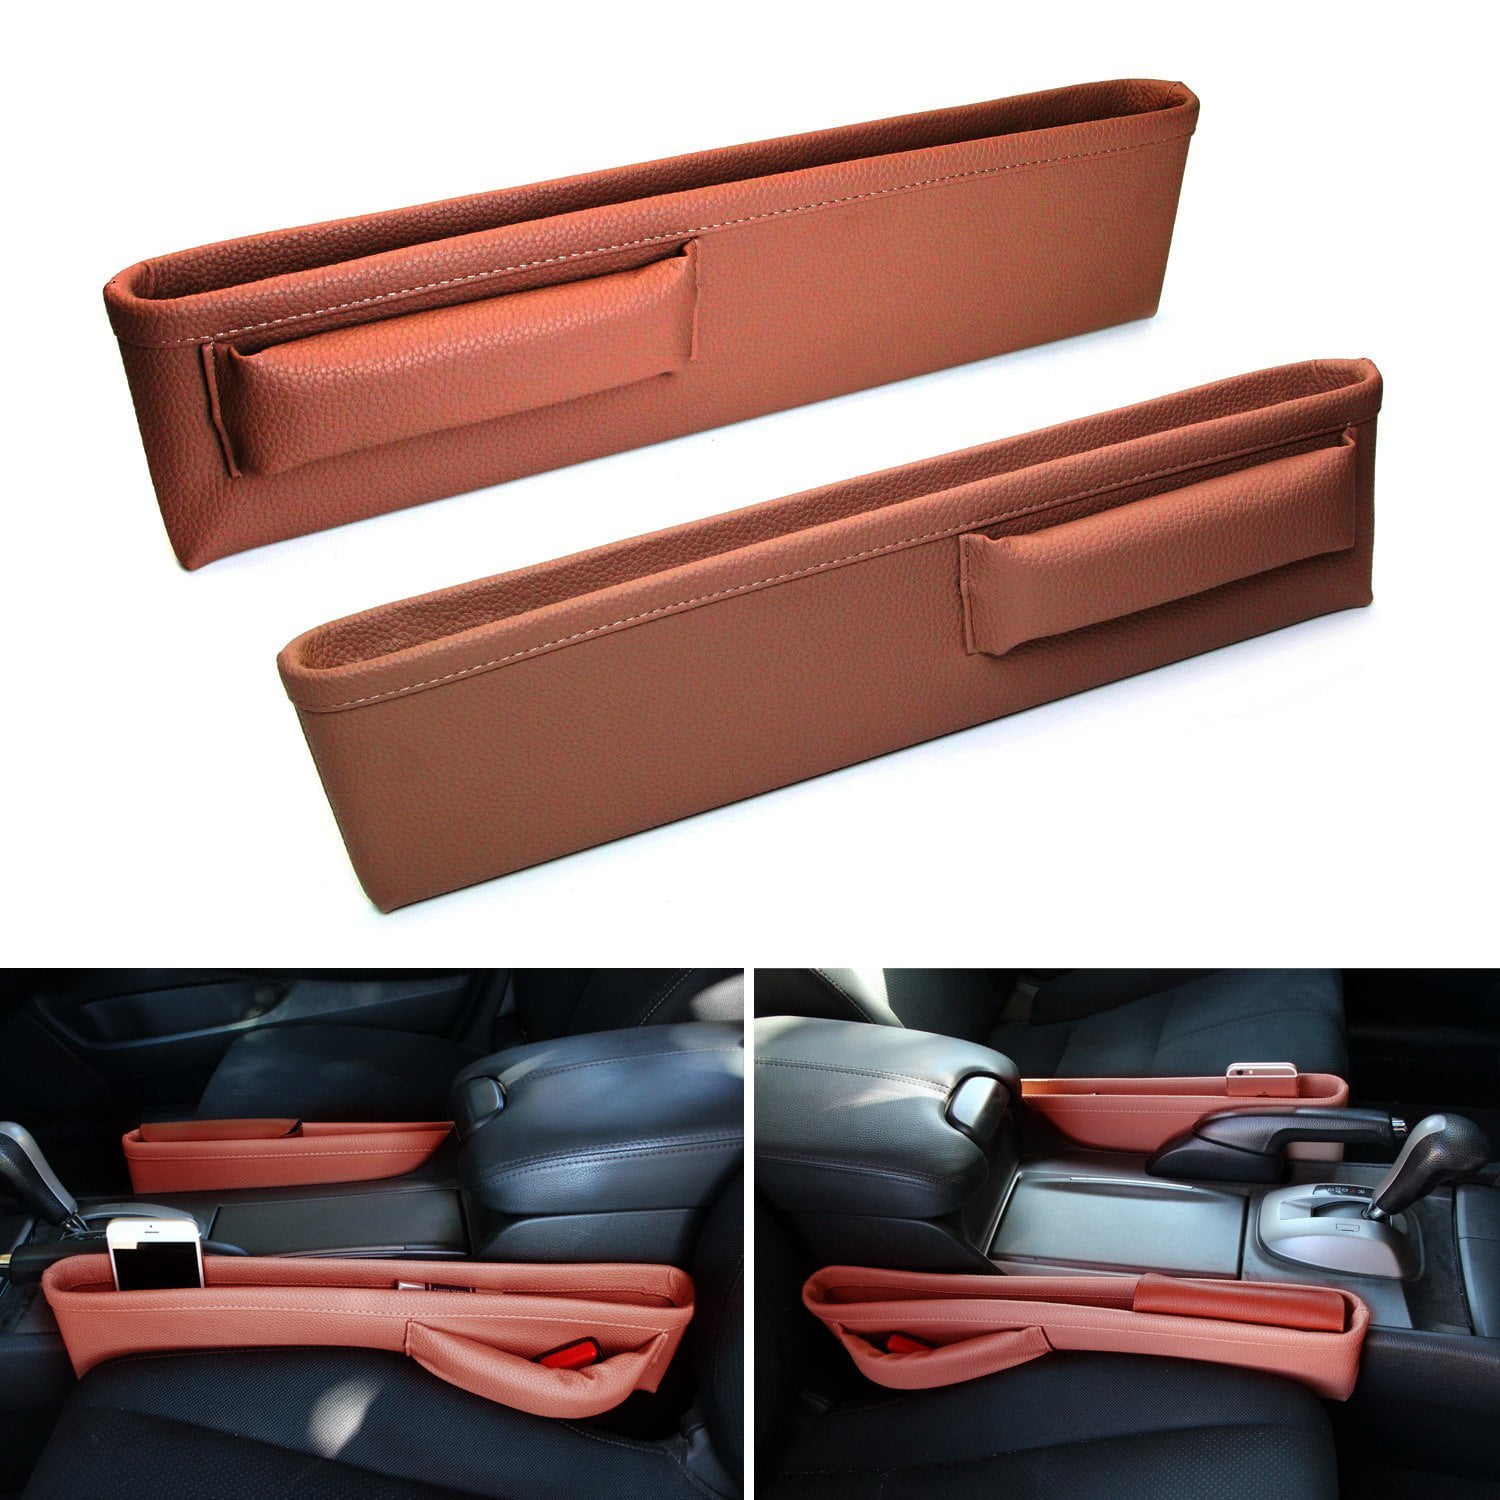 iJDMTOY Extra Long Beige Color Leather Car Side Pocket Organizers Wallet Phone Seat Catcher Holders For Key 2 Sunglasses etc iJDMTOY Auto Accessories